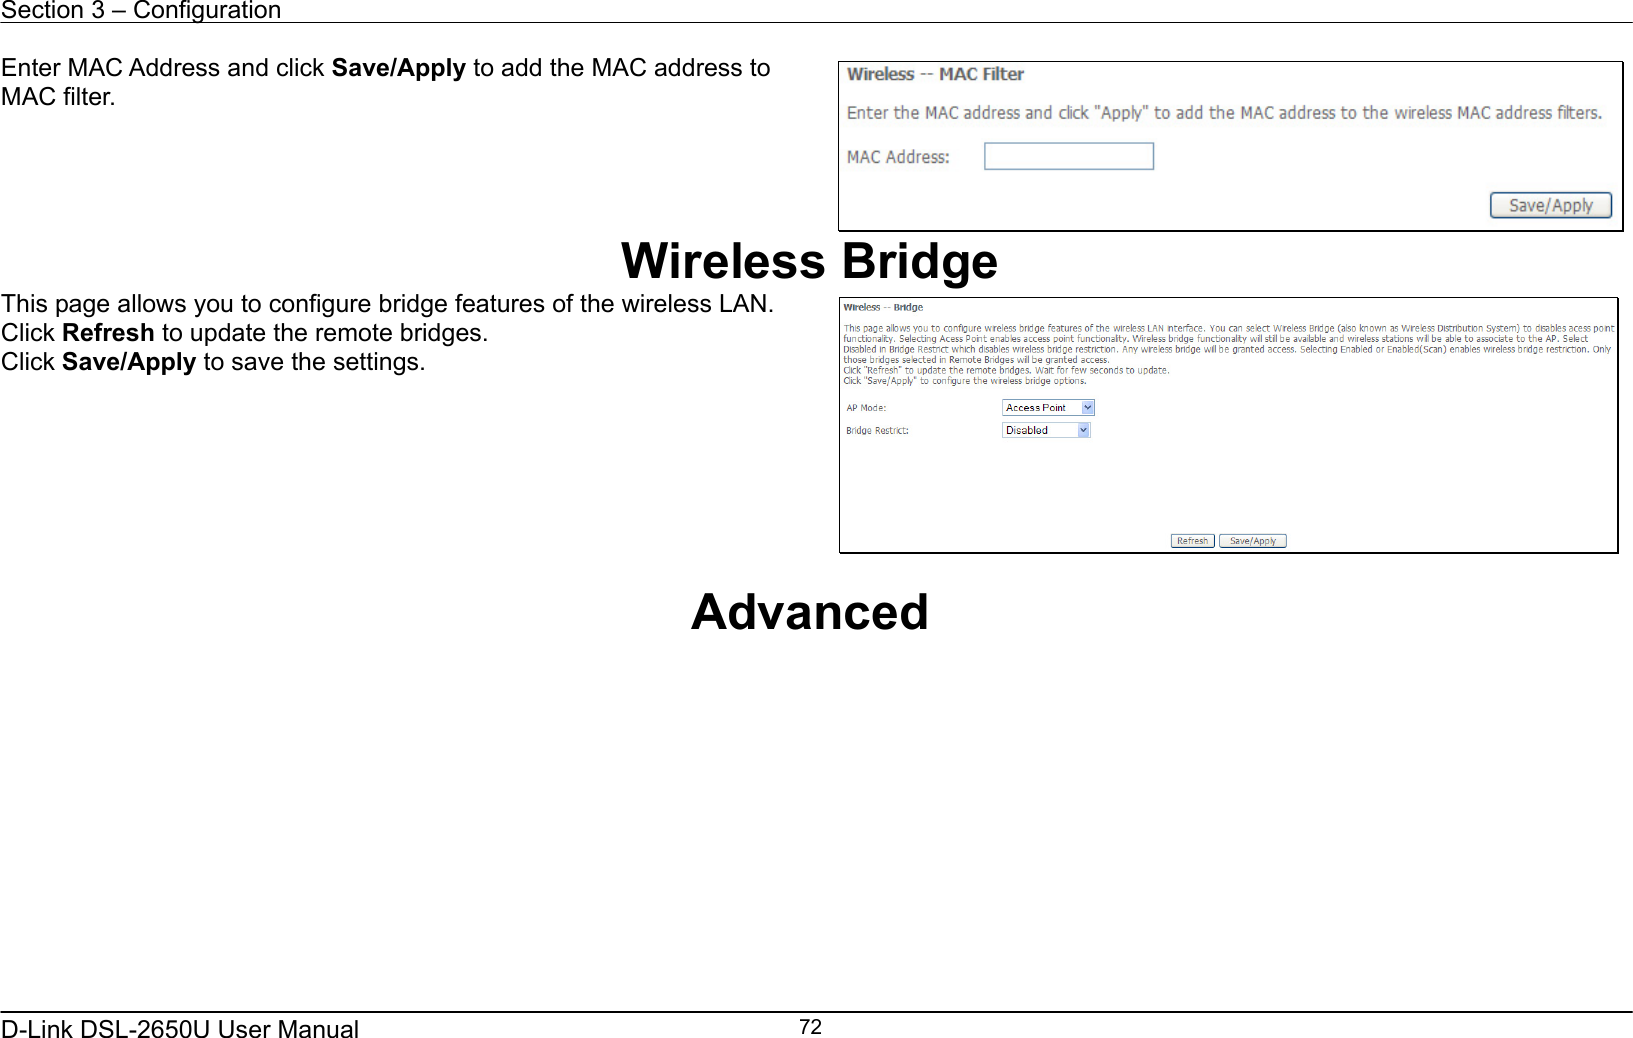 Section 3 – Configuration   D-Link DSL-2650U User Manual    72Enter MAC Address and click Save/Apply to add the MAC address to MAC filter.  Wireless Bridge This page allows you to configure bridge features of the wireless LAN. Click Refresh to update the remote bridges. Click Save/Apply to save the settings.    Advanced 